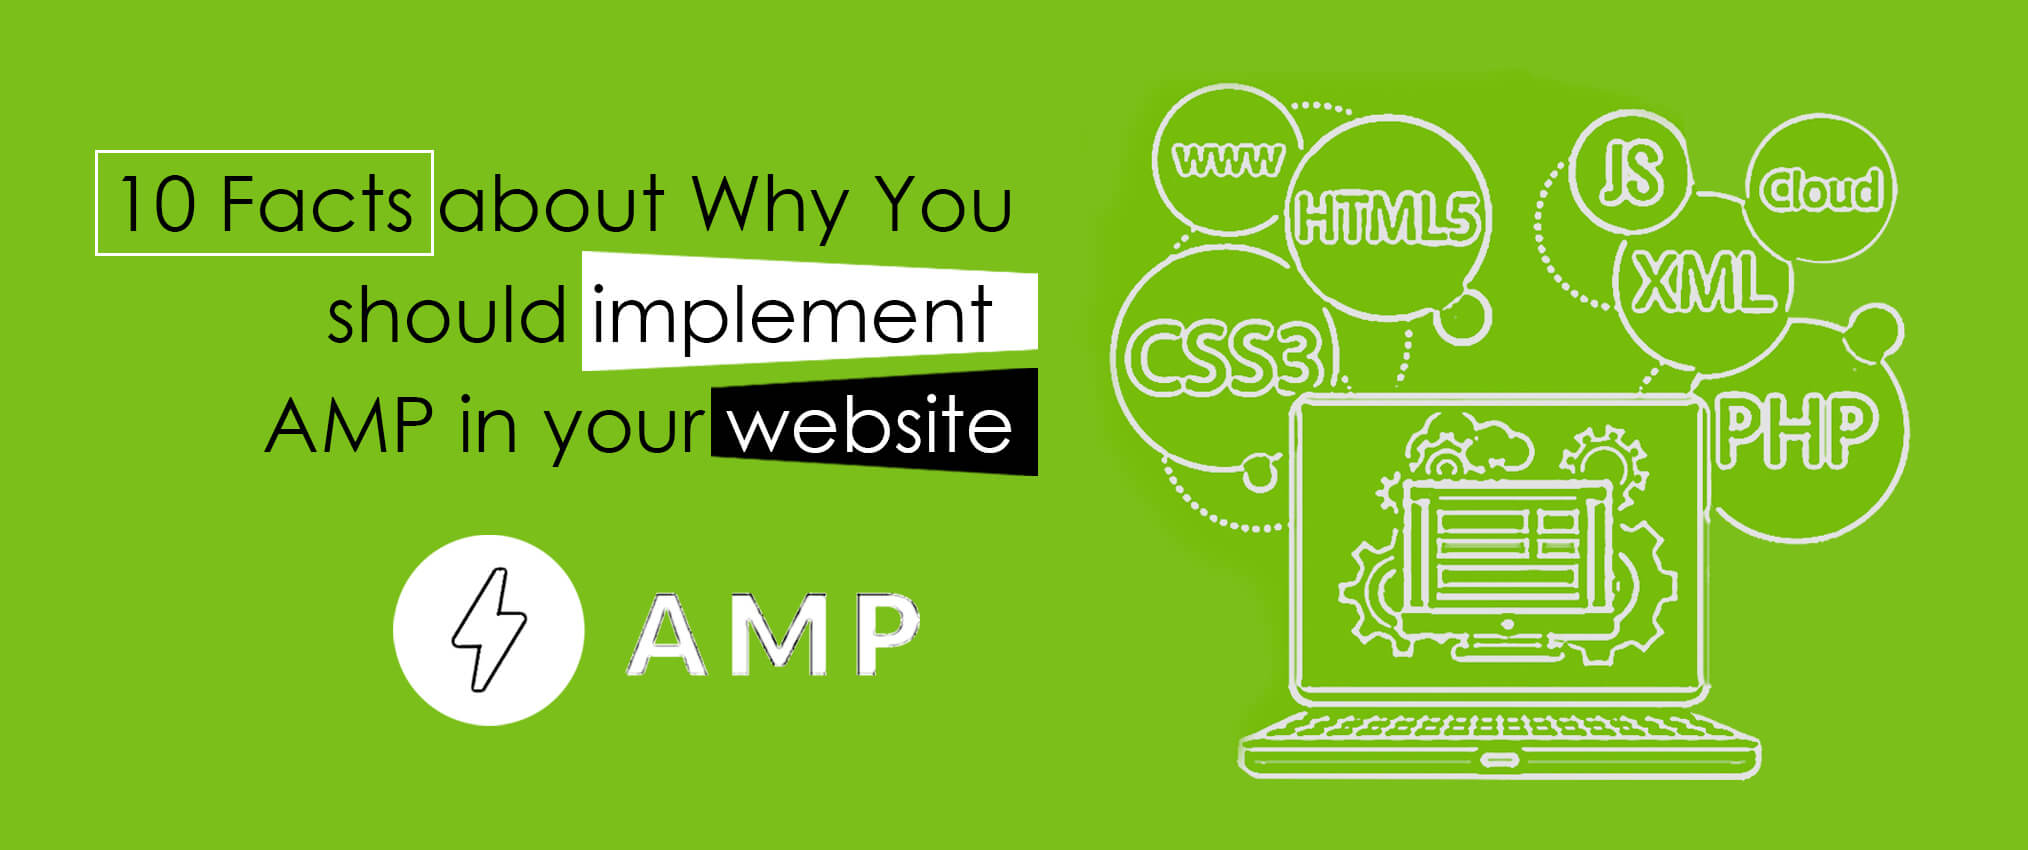 10 Facts about Why You should implement AMP in your Website